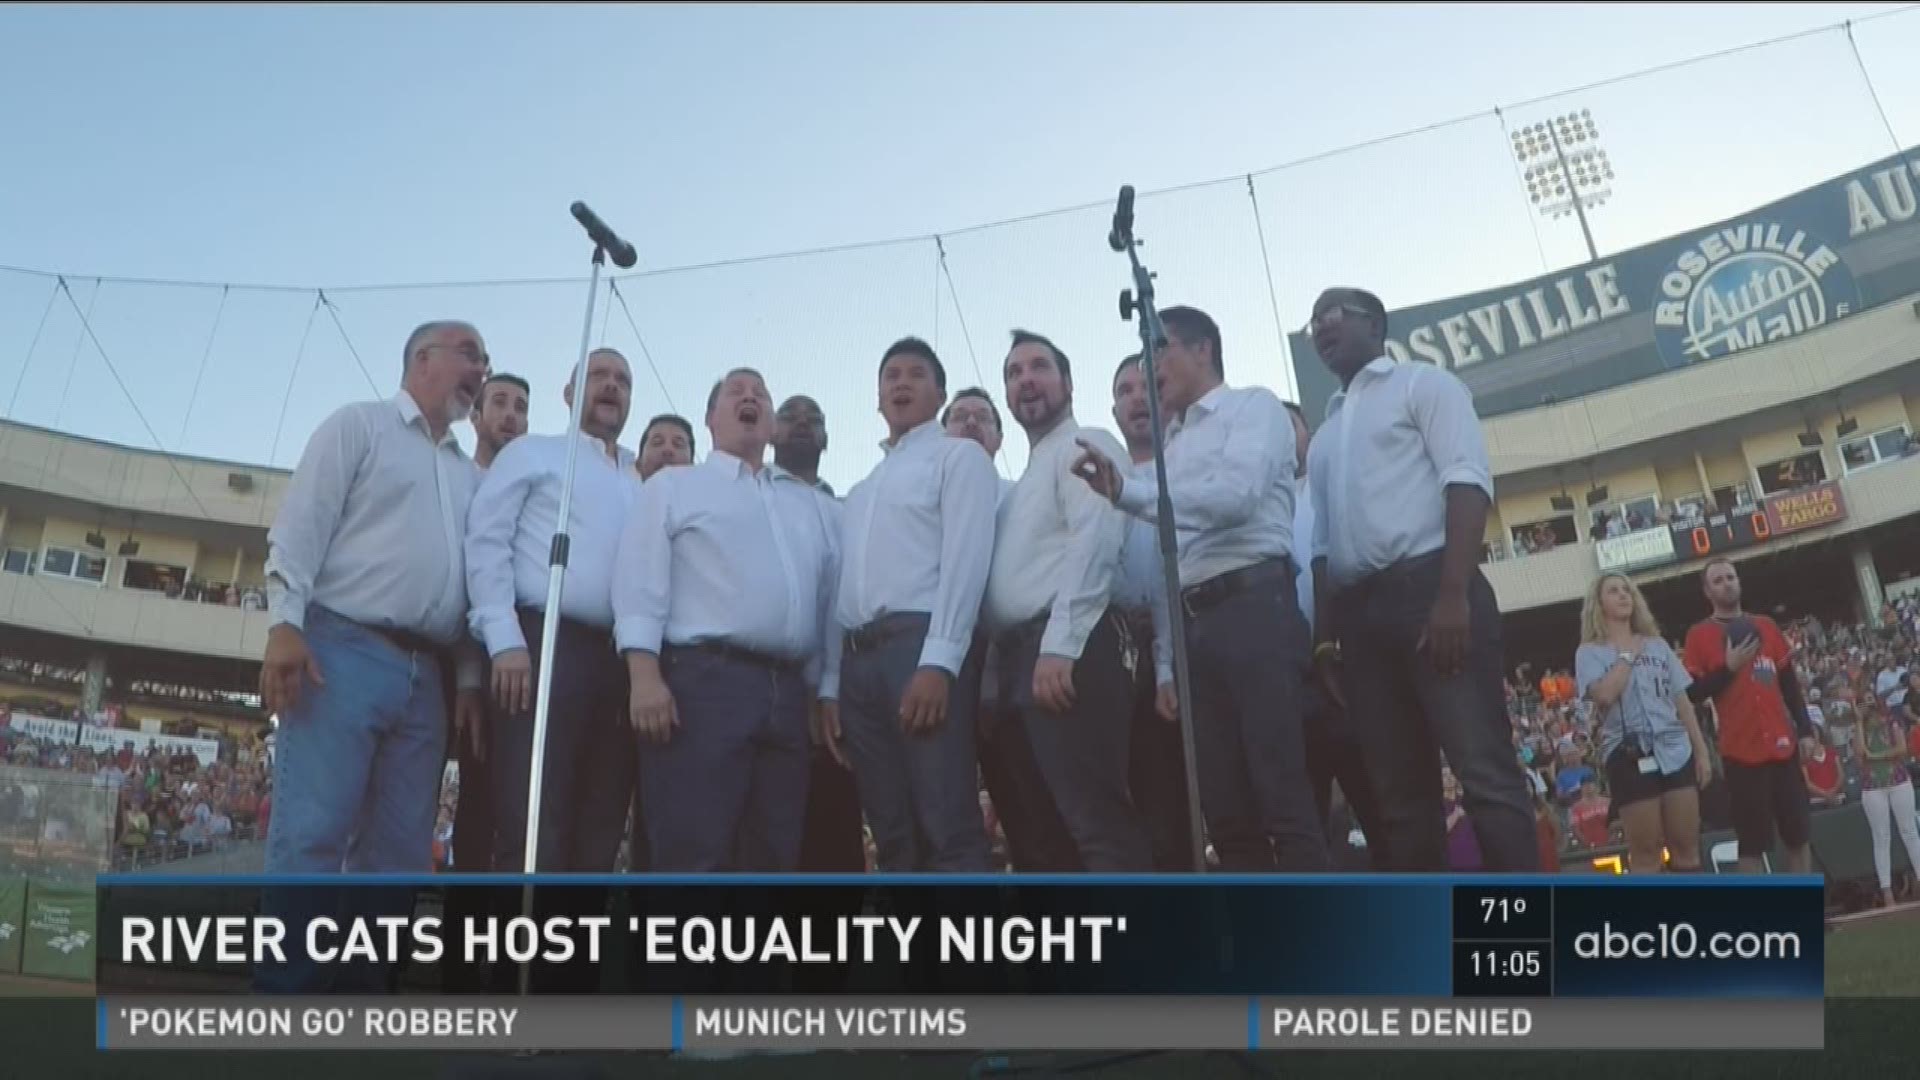 River Cats host "Equality Night" on Friday to support LGBTQ rights. (July 22, 2016)